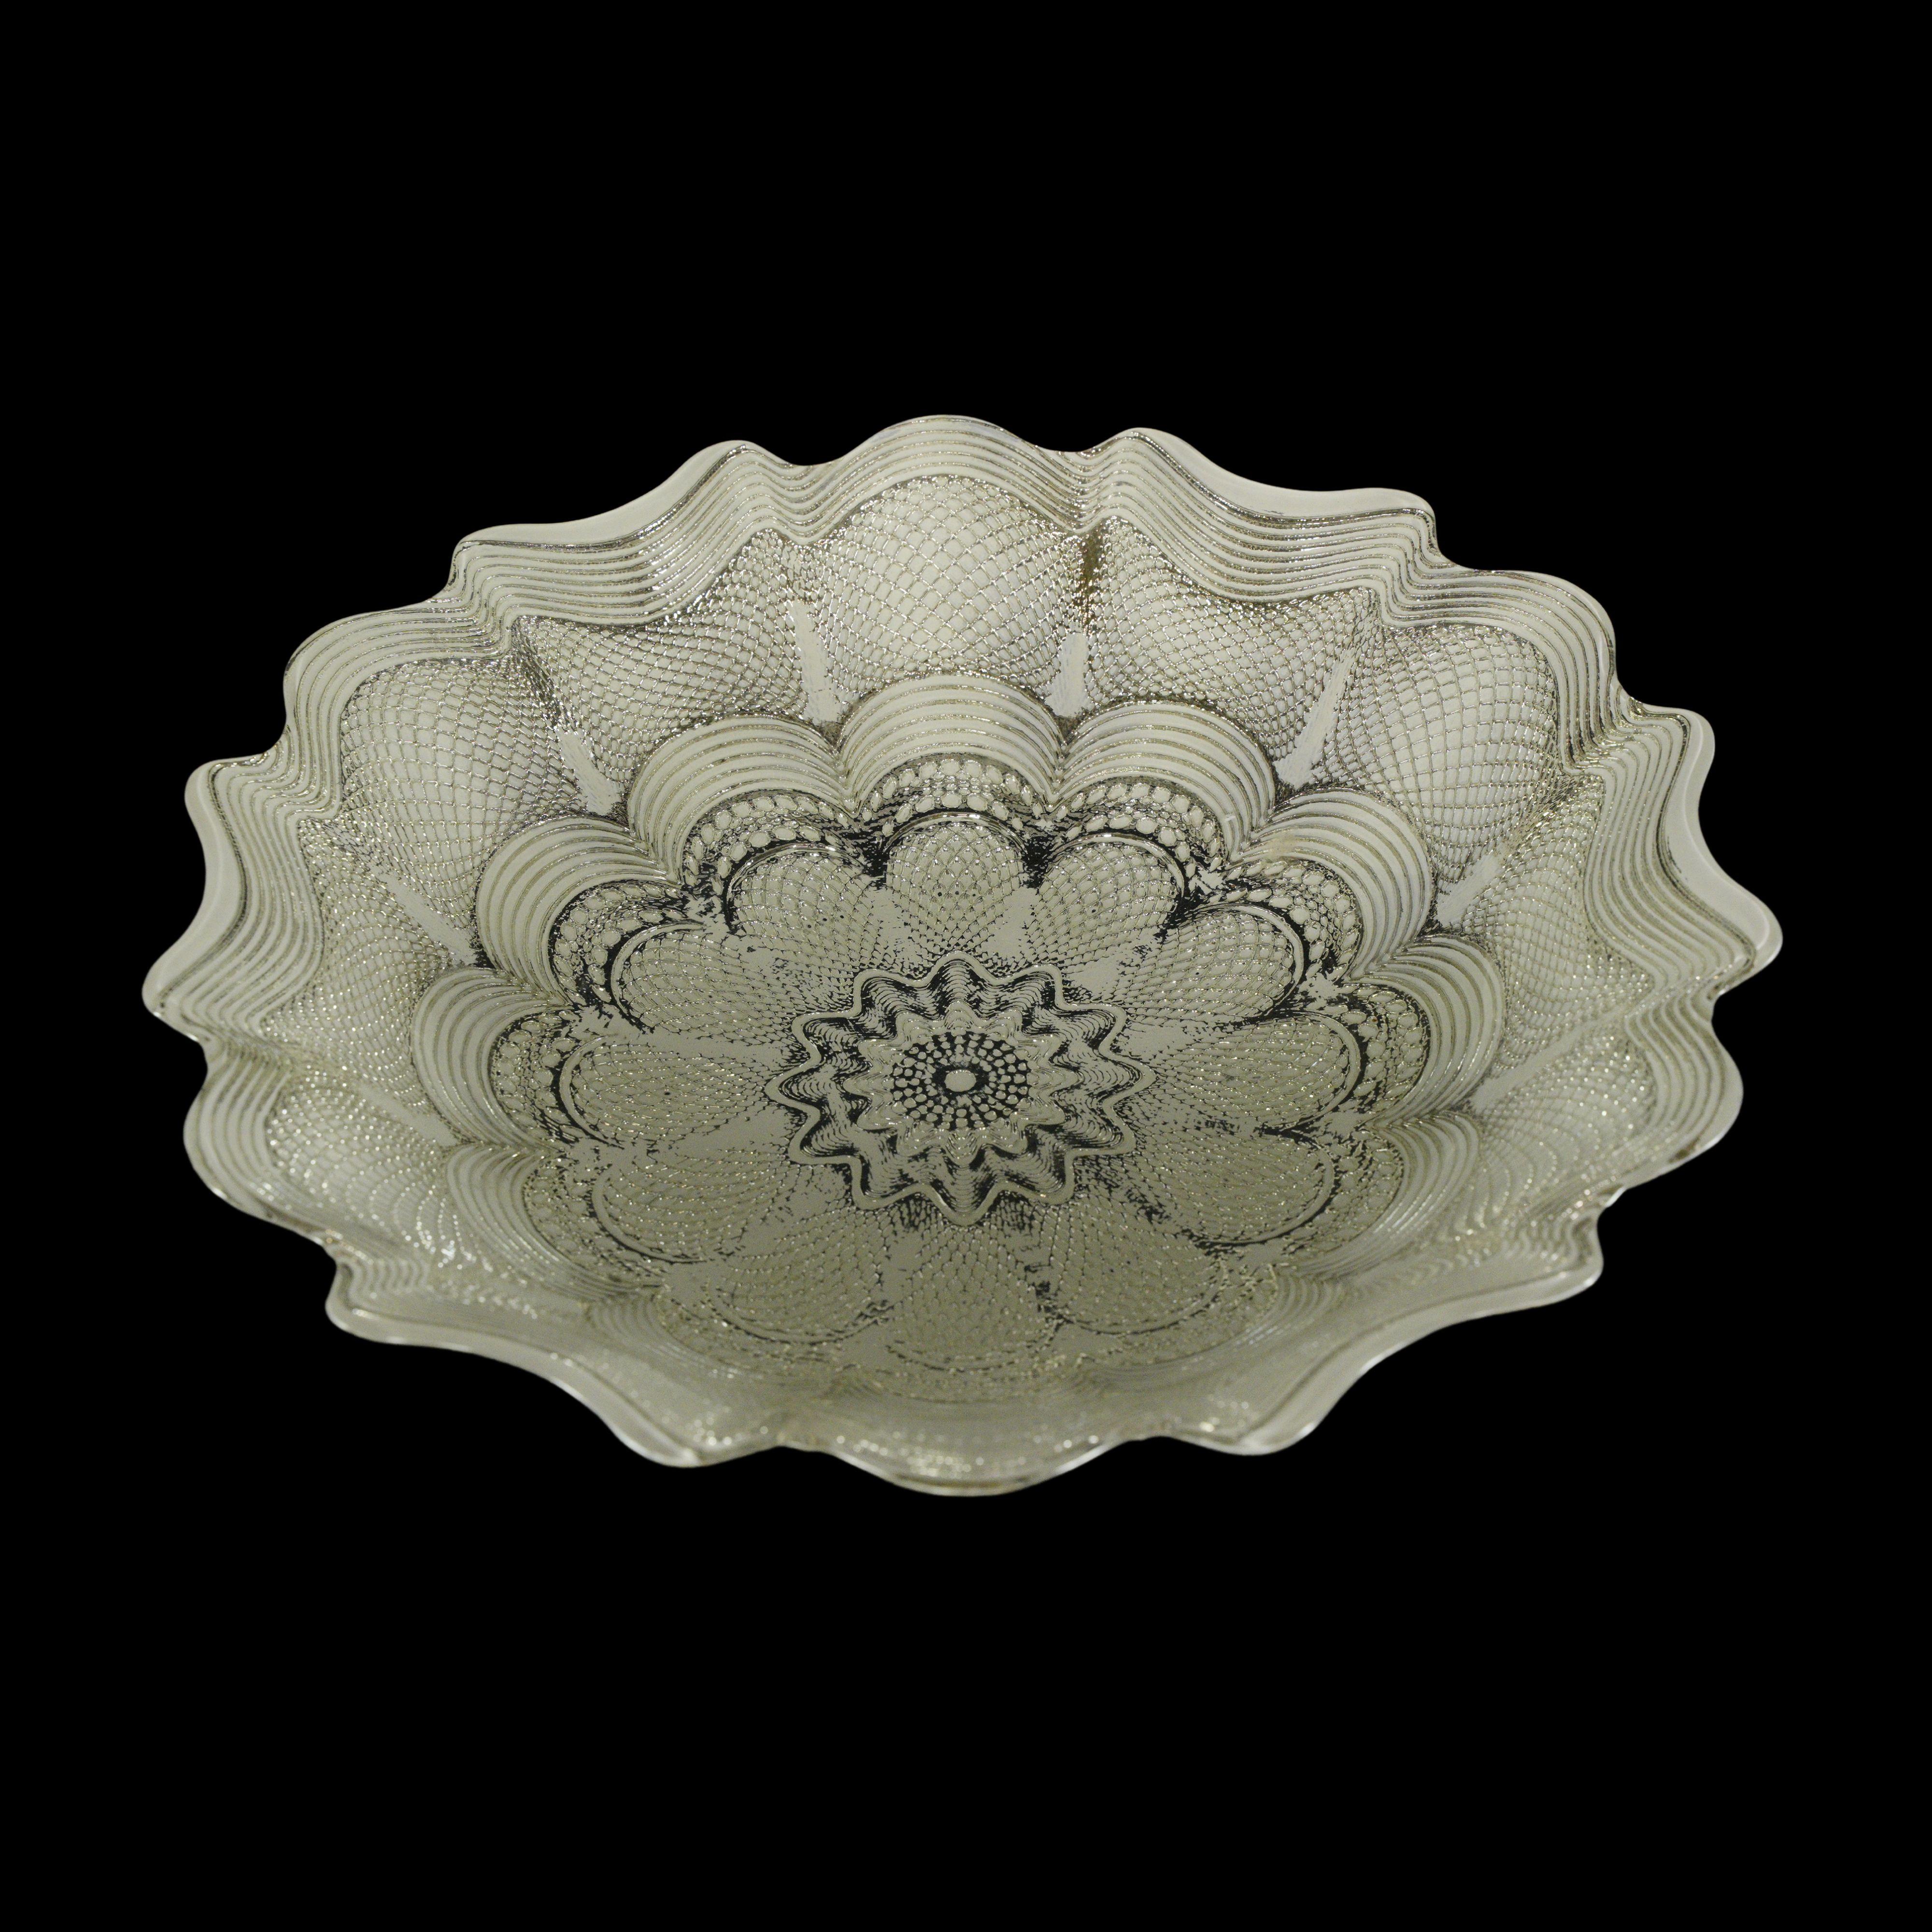 Clear and white glass bowl with silver tone finish backing. This delightful bowl features beautiful floral details. Acquired from an estate located in Greenwich, Connecticut. Good condition with surface wear from prior use. One available. Please